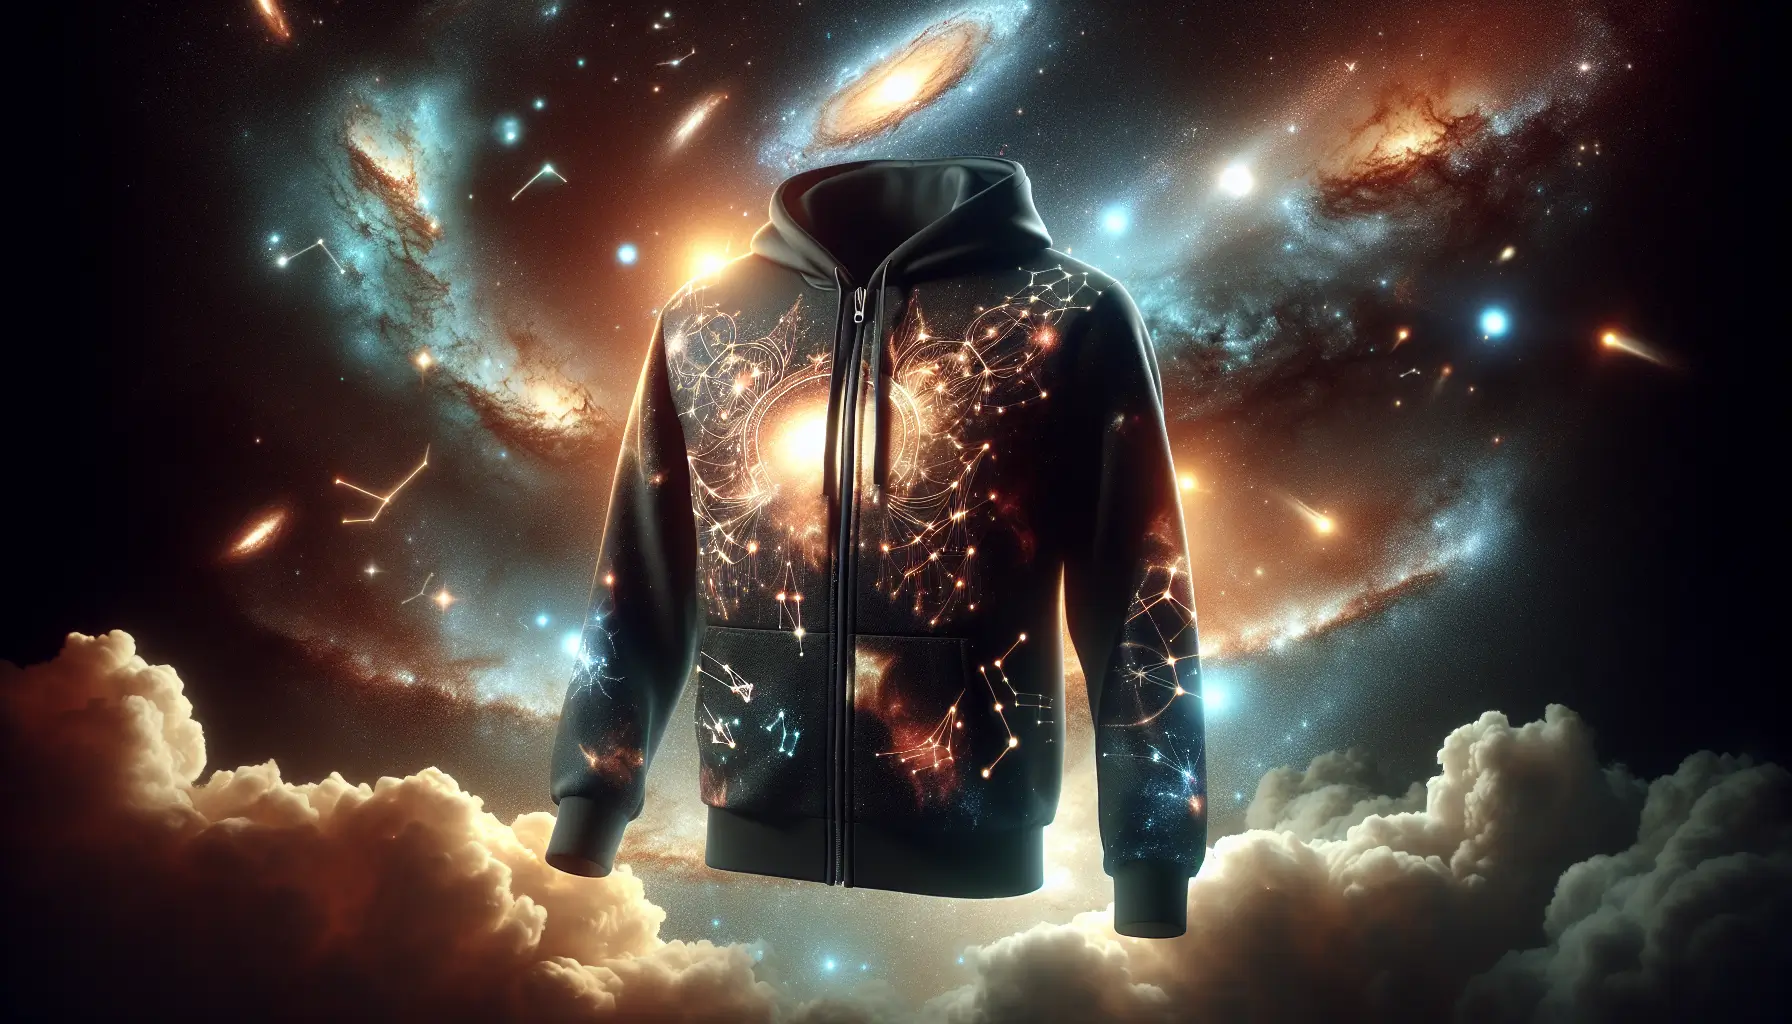 The Best Space Hoodies: Astronomy-Inspired Apparel for 2024. This is a sleek, dark background with a galaxy or cosmic nebula as the backdrop. In the foreground, there's a beautifully designed space hoodie, featuring intricate celestial patterns, constellations, or planetary elements. The hoodie should be well-lit to highlight its details, with a subtle glow emanating from the cosmic design. This captivating visual would convey the theme of astronomy-inspired fashion, inviting readers to explore the celestial allure of space-themed hoodies without any text or faces to maintain a clean and elegant appearance.